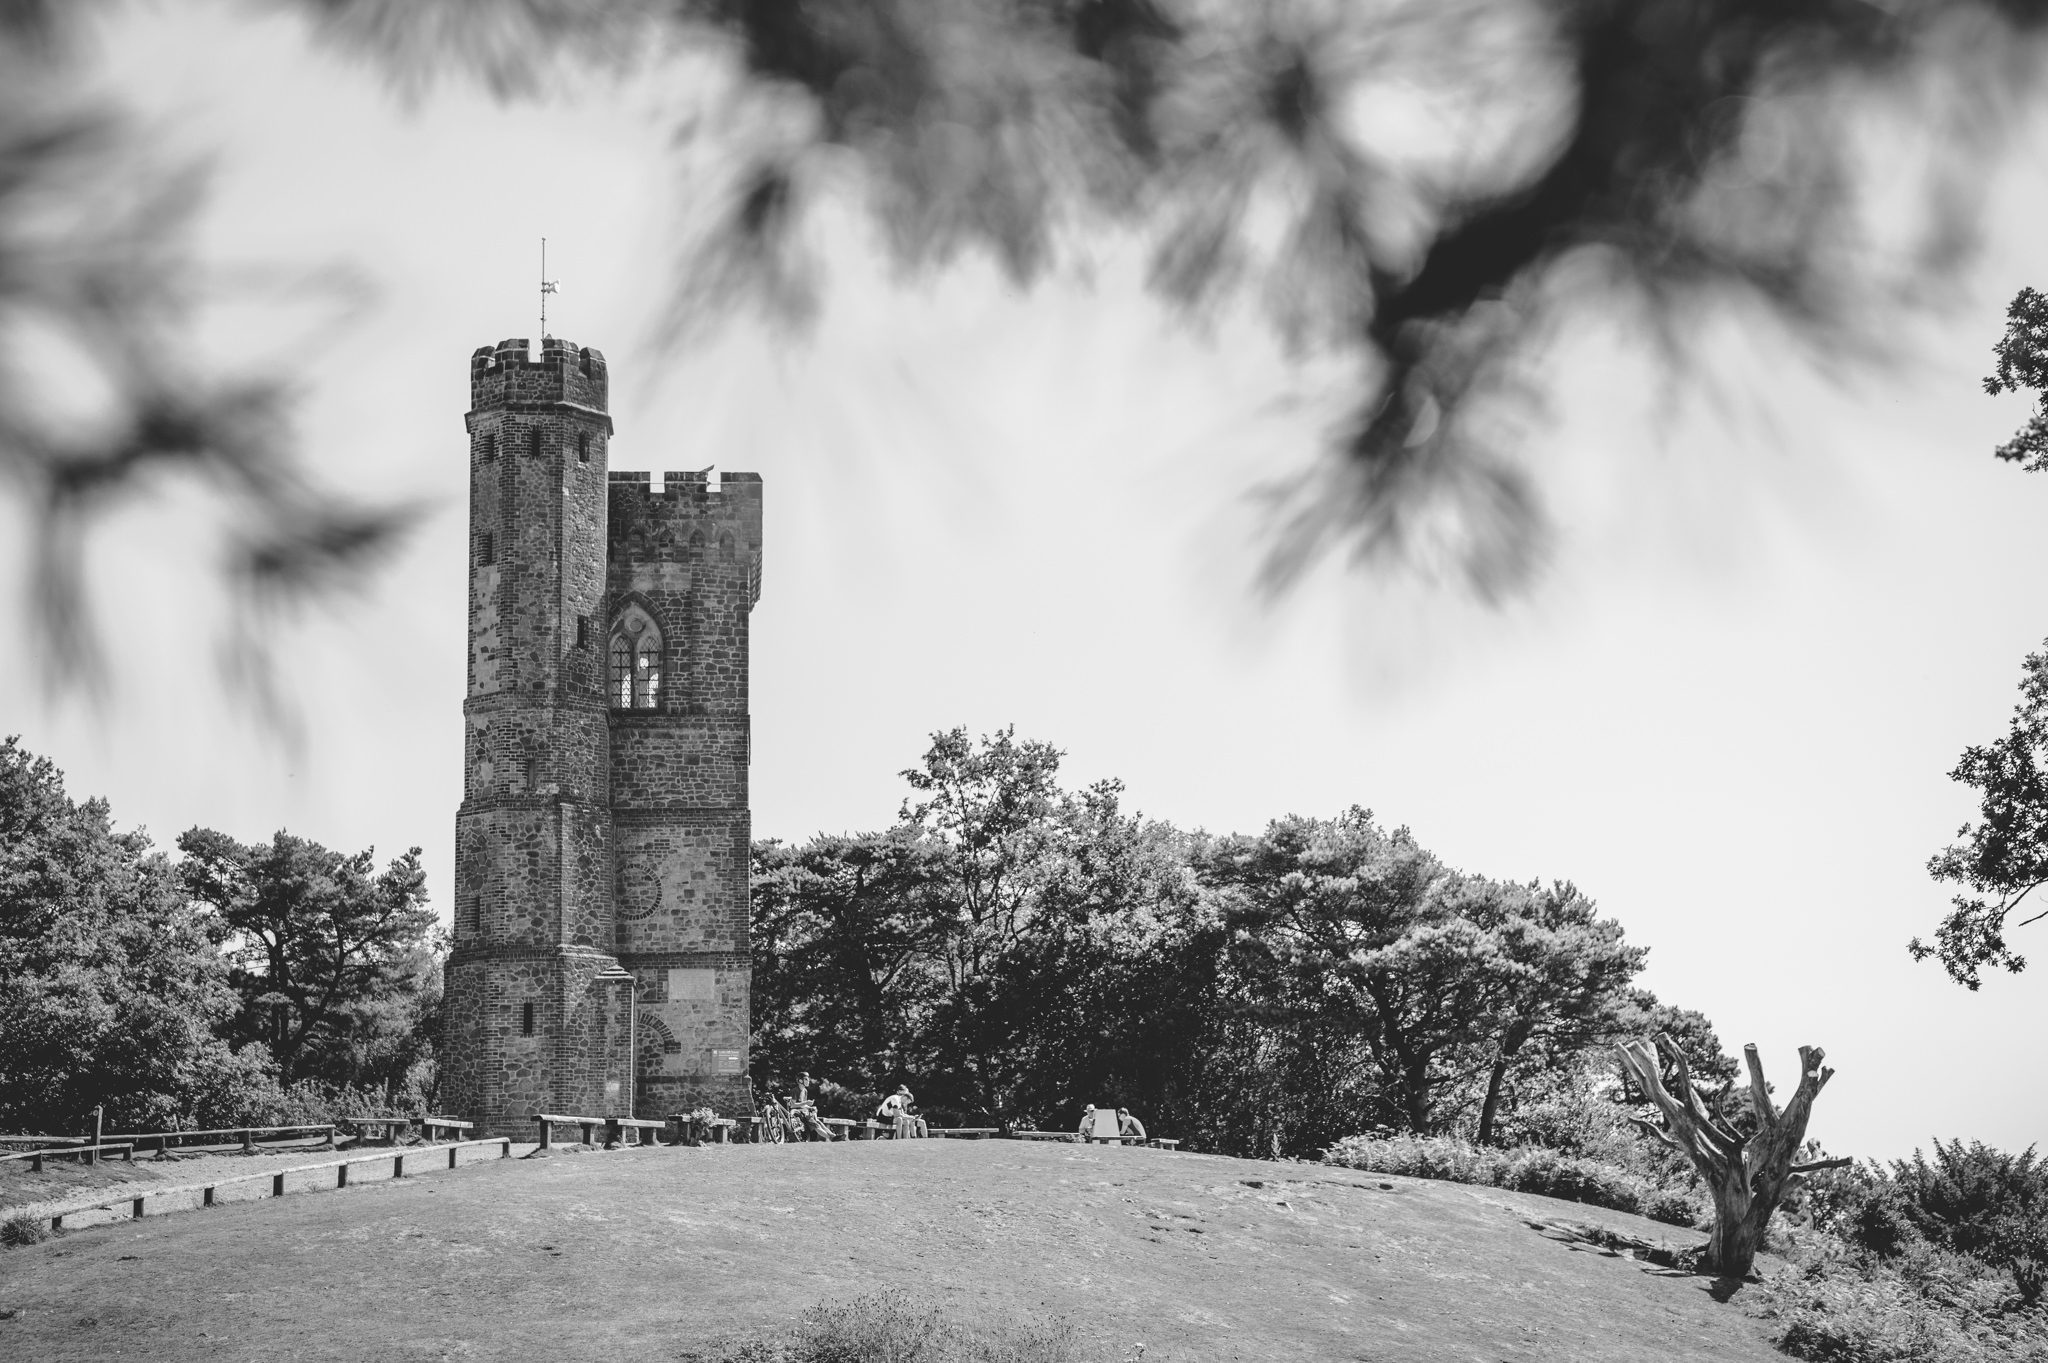 The tower on leith Hill